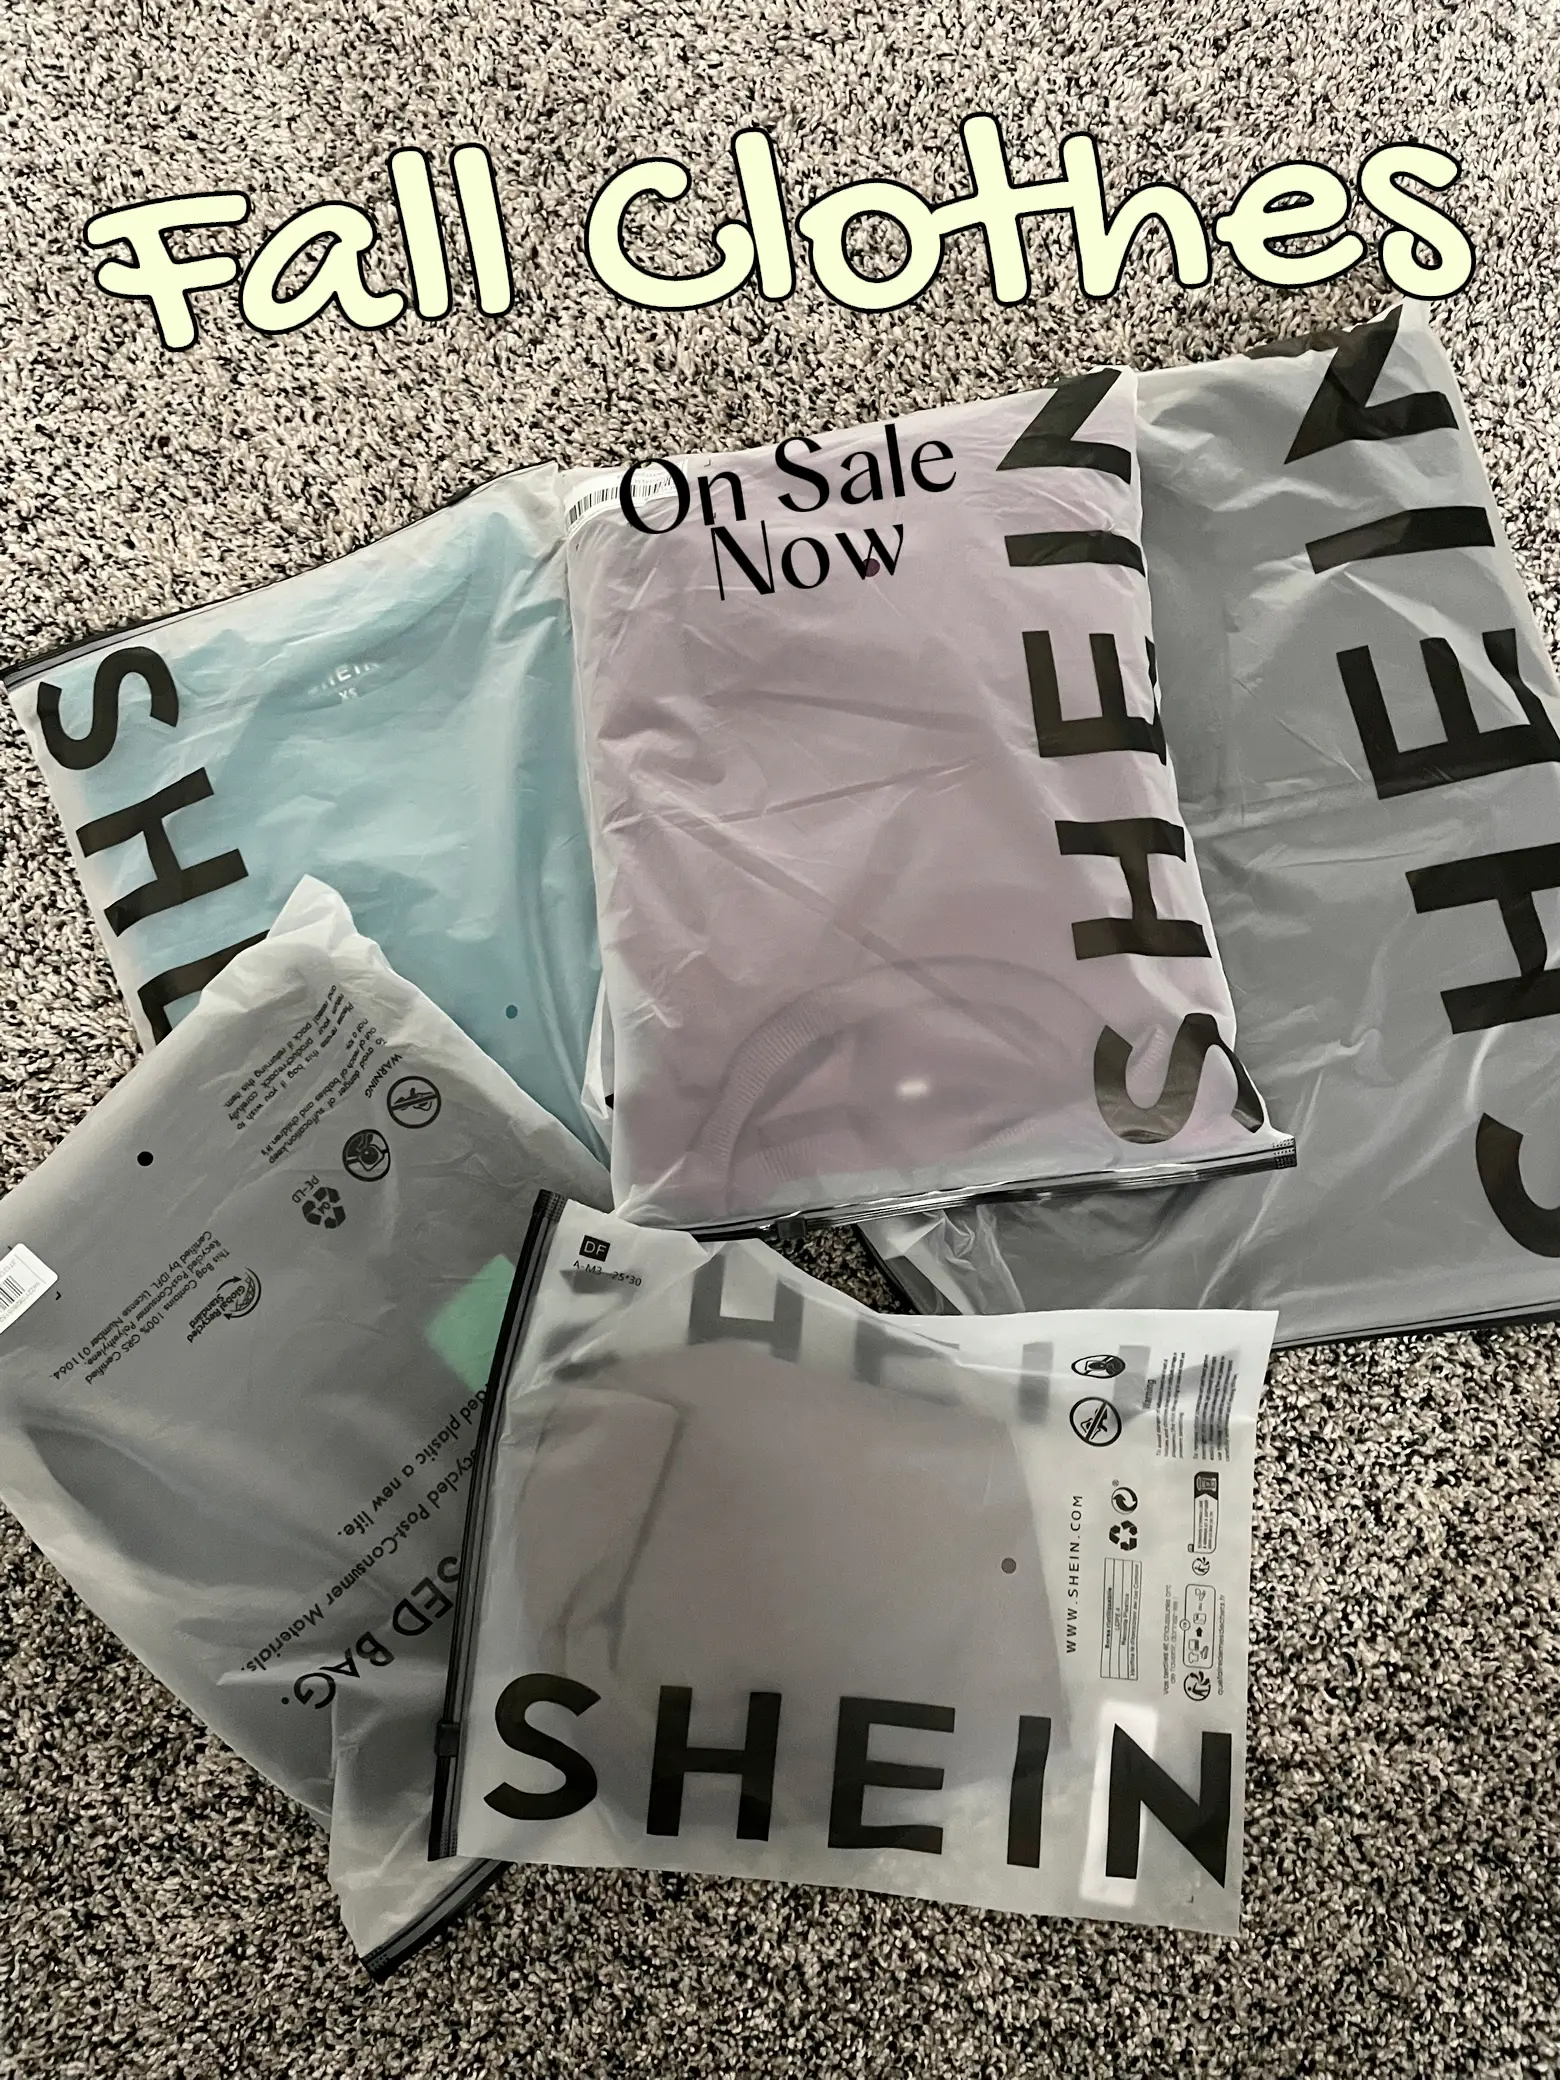 SHEIN Women Panties Sale As low as $1+Extra 15% OFf